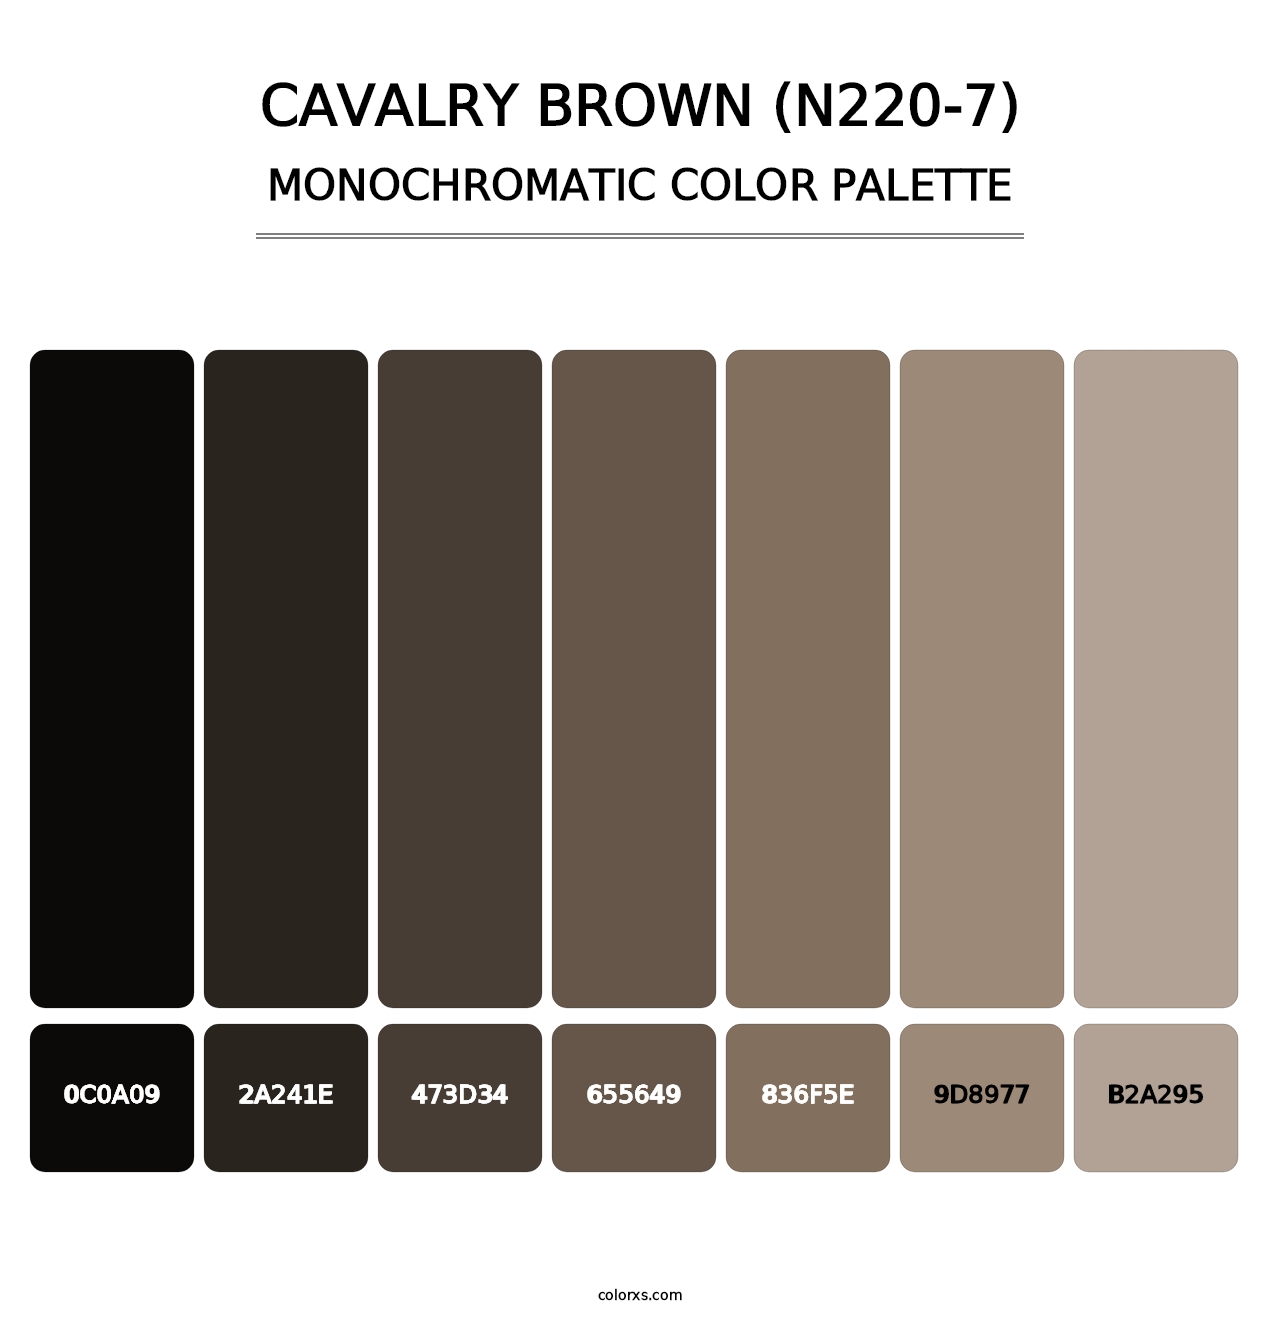 Cavalry Brown (N220-7) - Monochromatic Color Palette